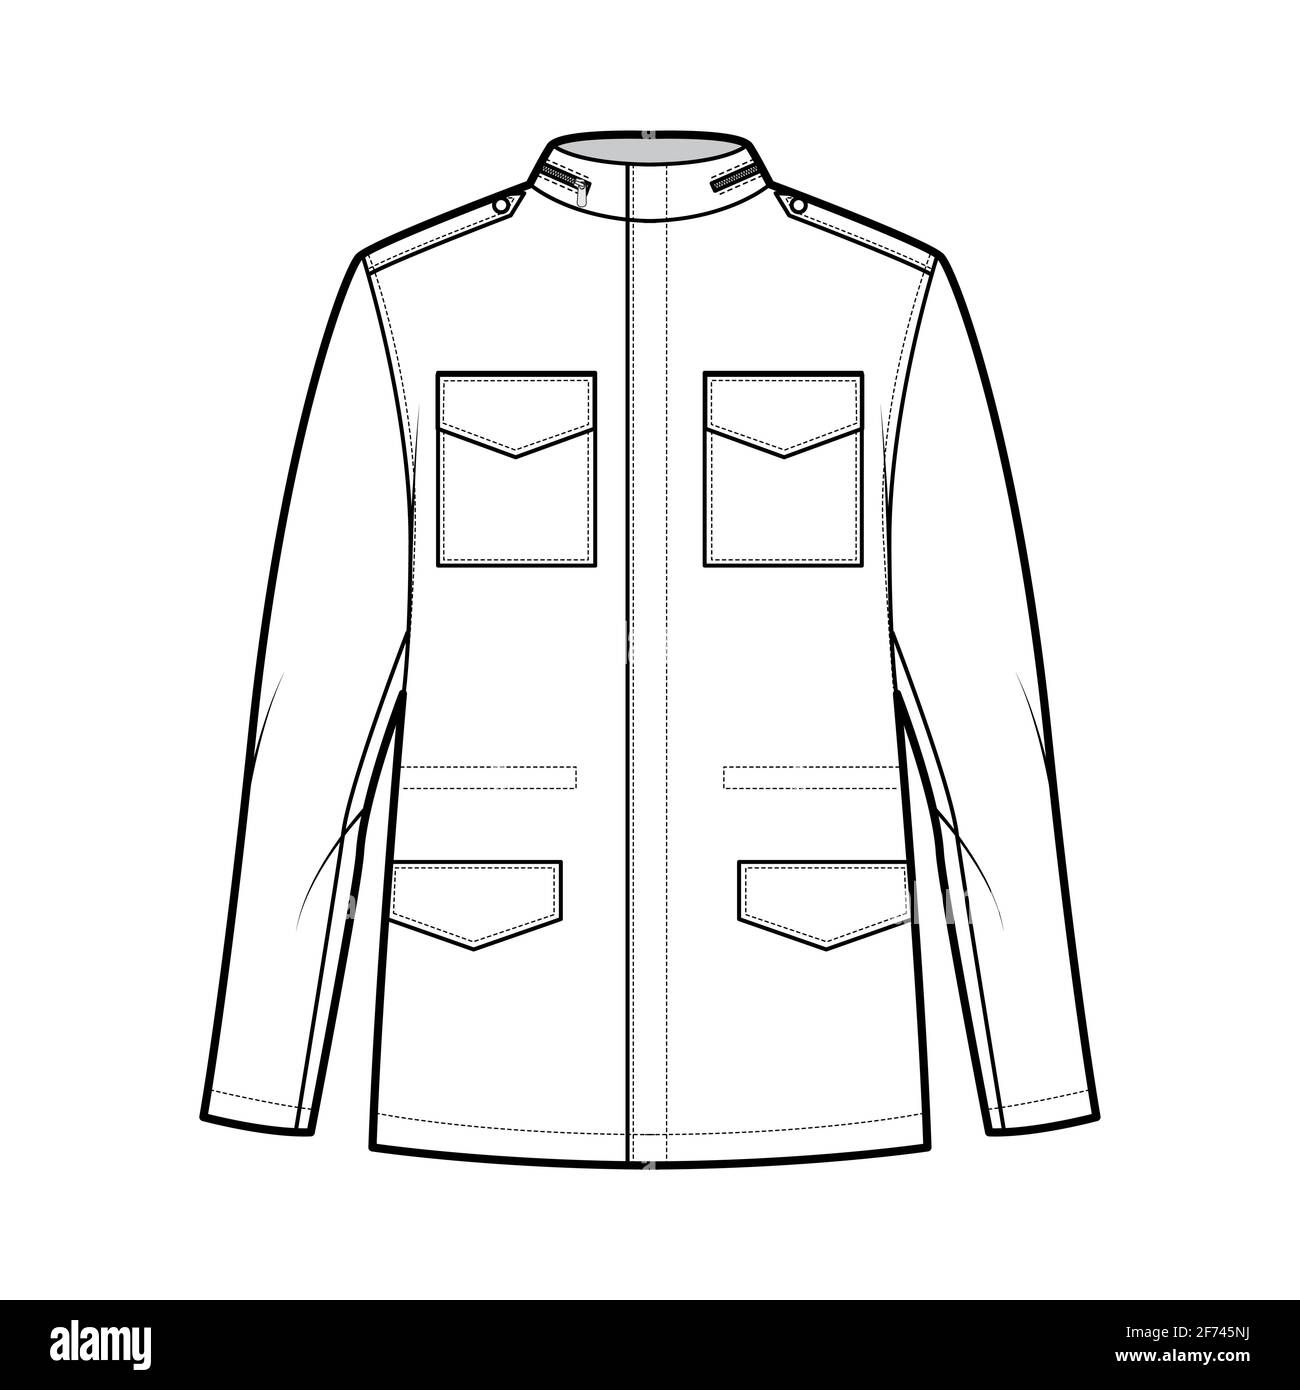 M-65 field jacket technical fashion illustration with oversized, stand collar, hide hood, long sleeves, flap pockets, epaulettes. Flat coat template front, white color style. Women men top CAD mockup Stock Vector